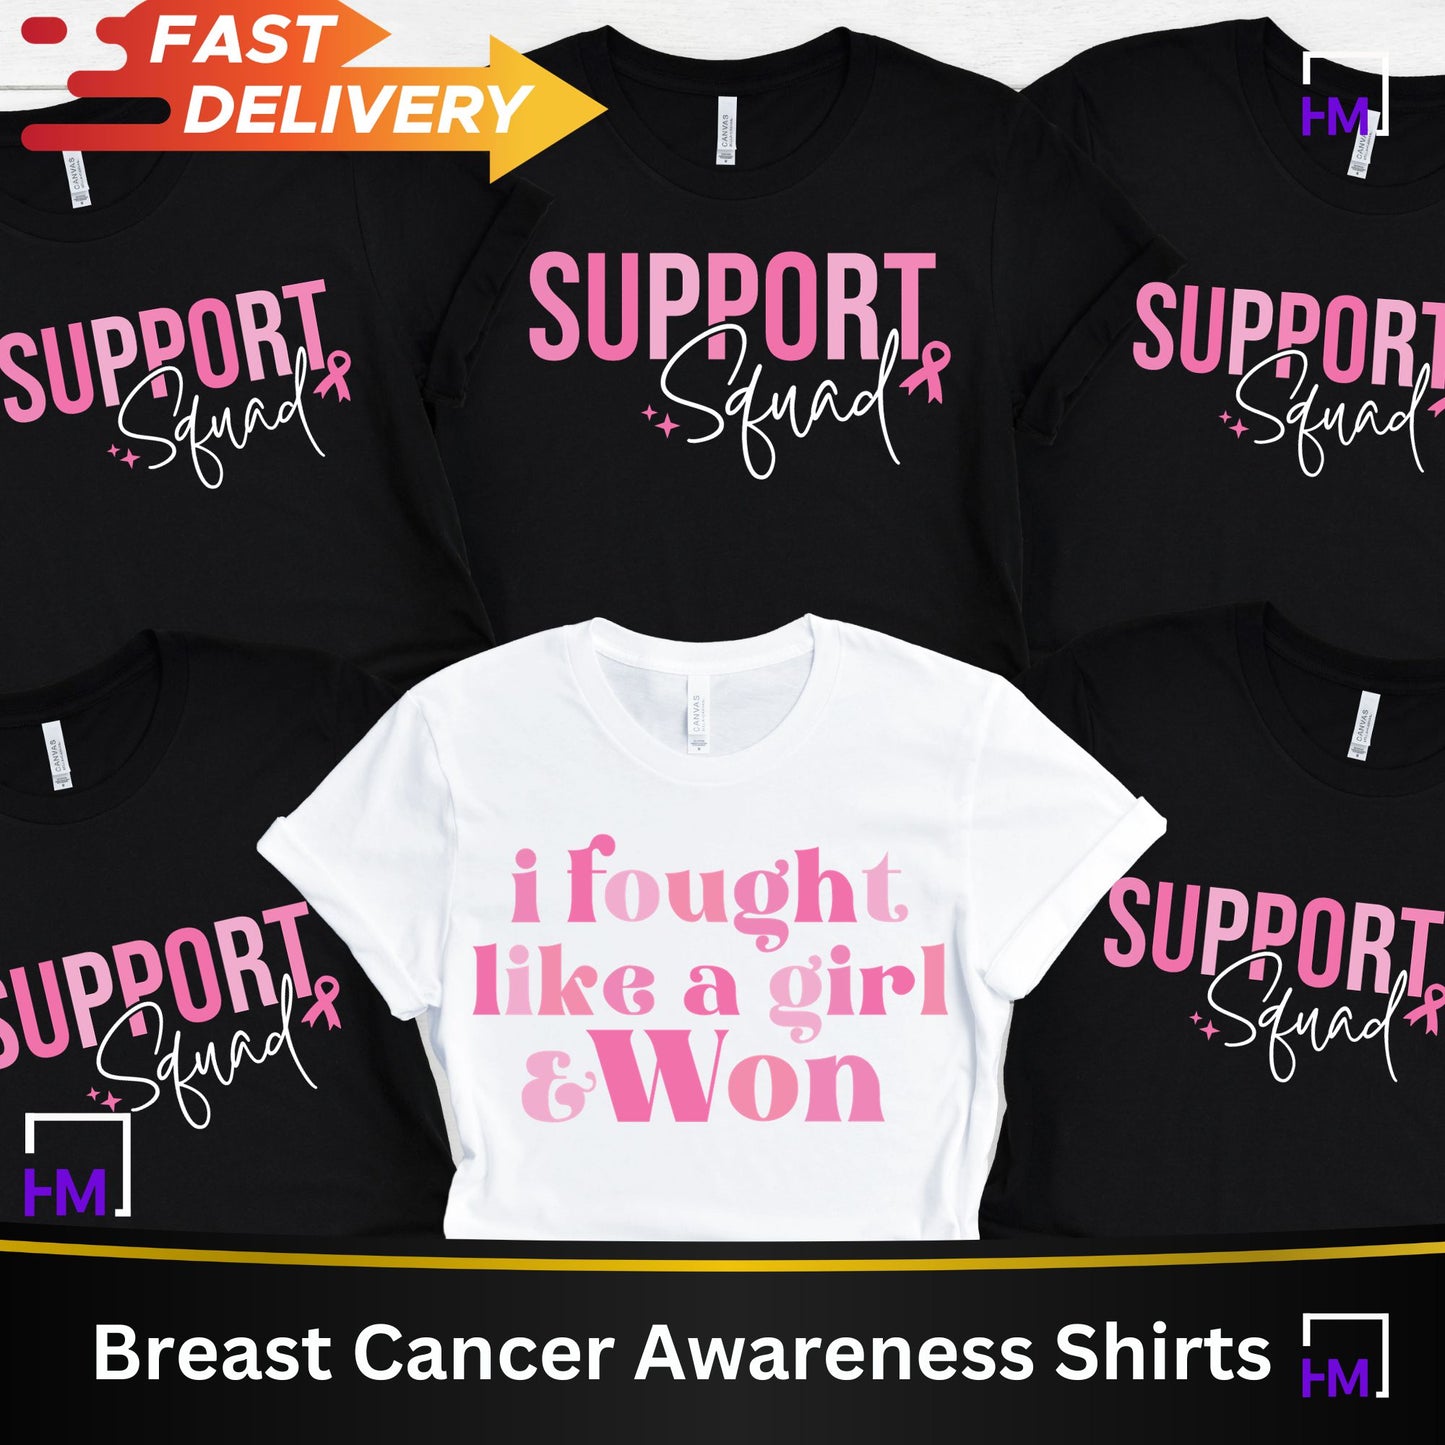 I Fought Like a Girl and Won Breast Cancer Awareness Family Shirts